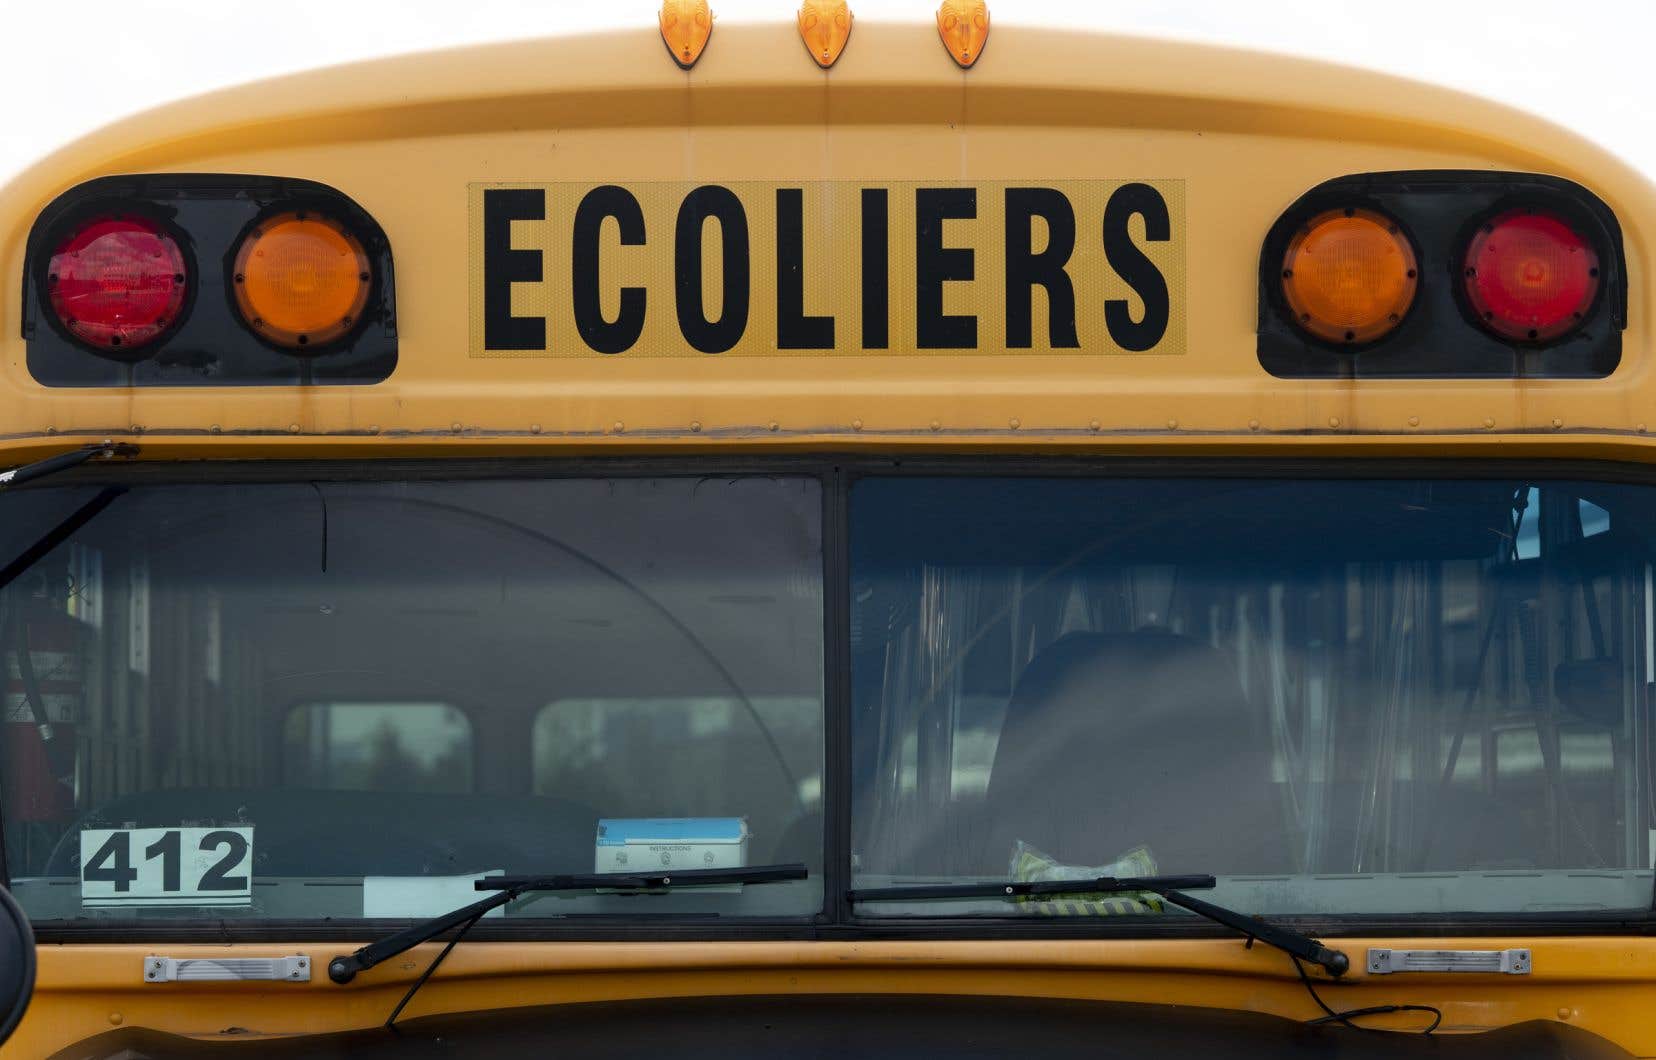 A local initiative to electrify school buses

